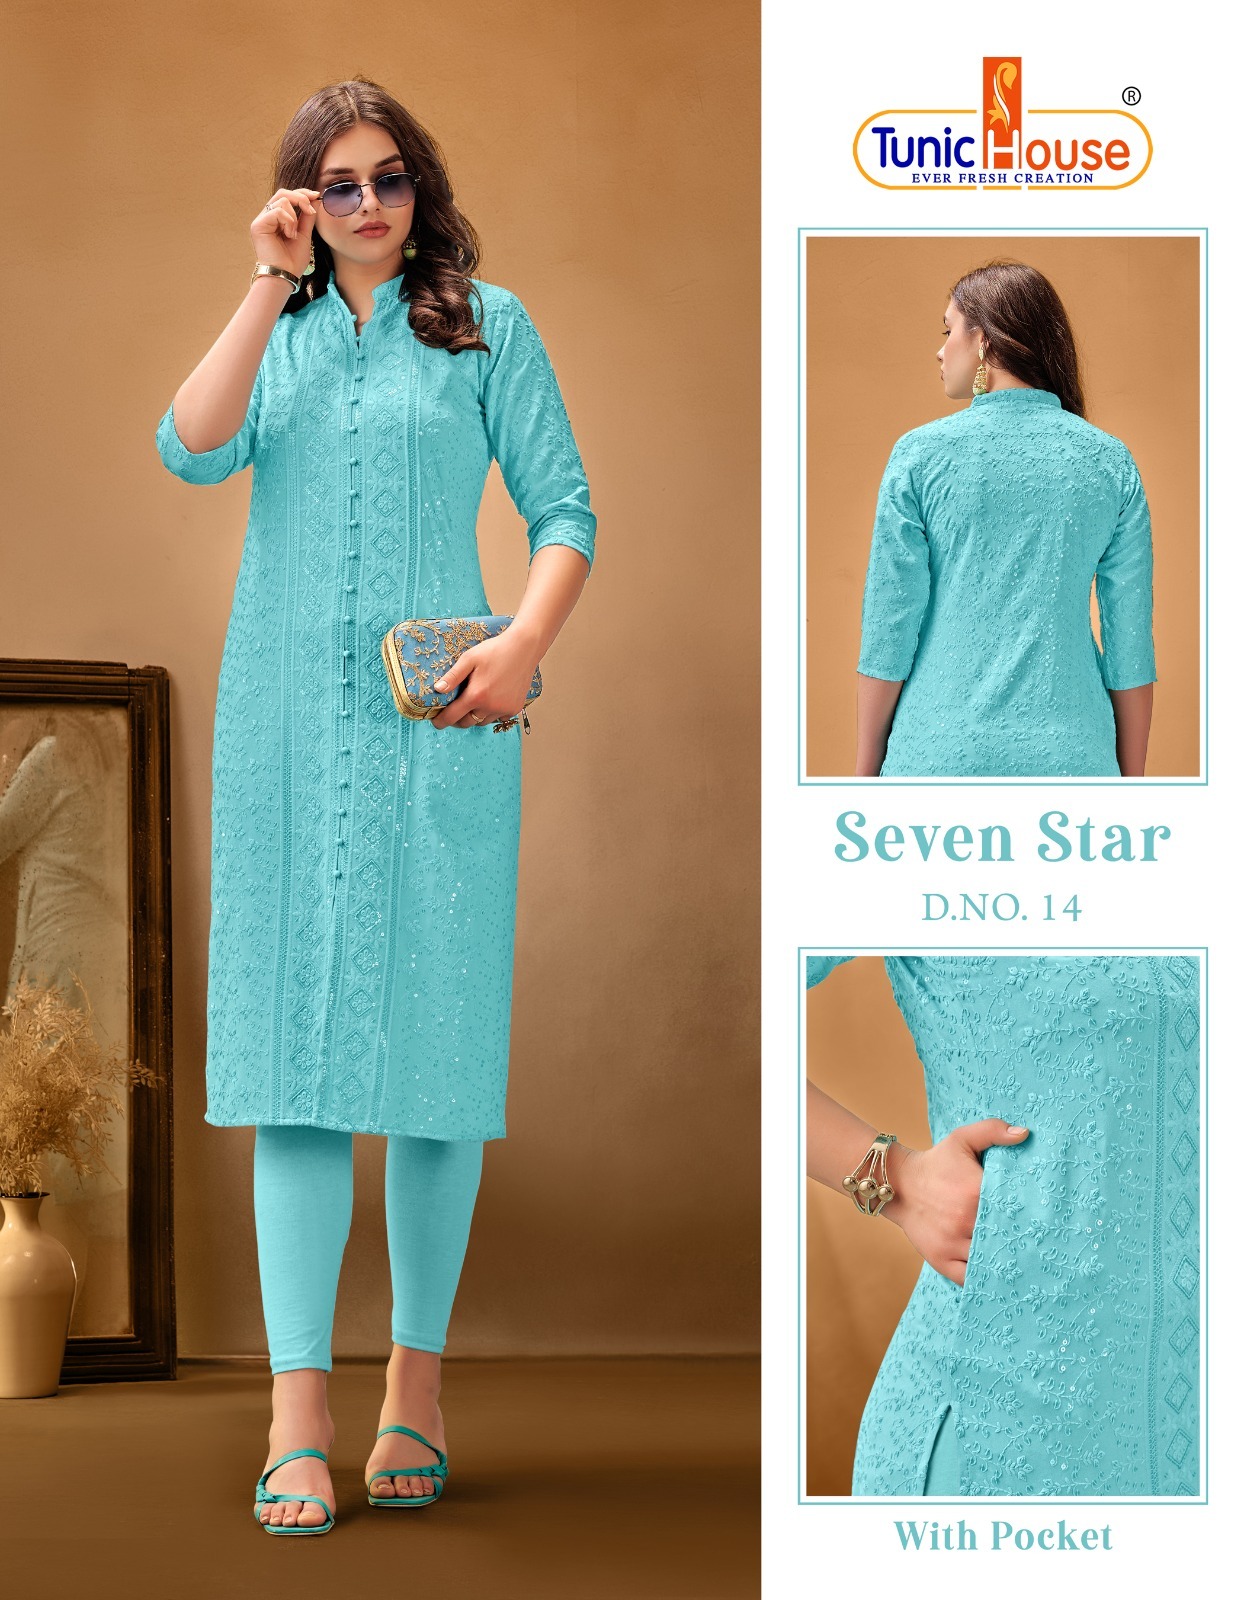 Tunic Houes 7 Star collection 9